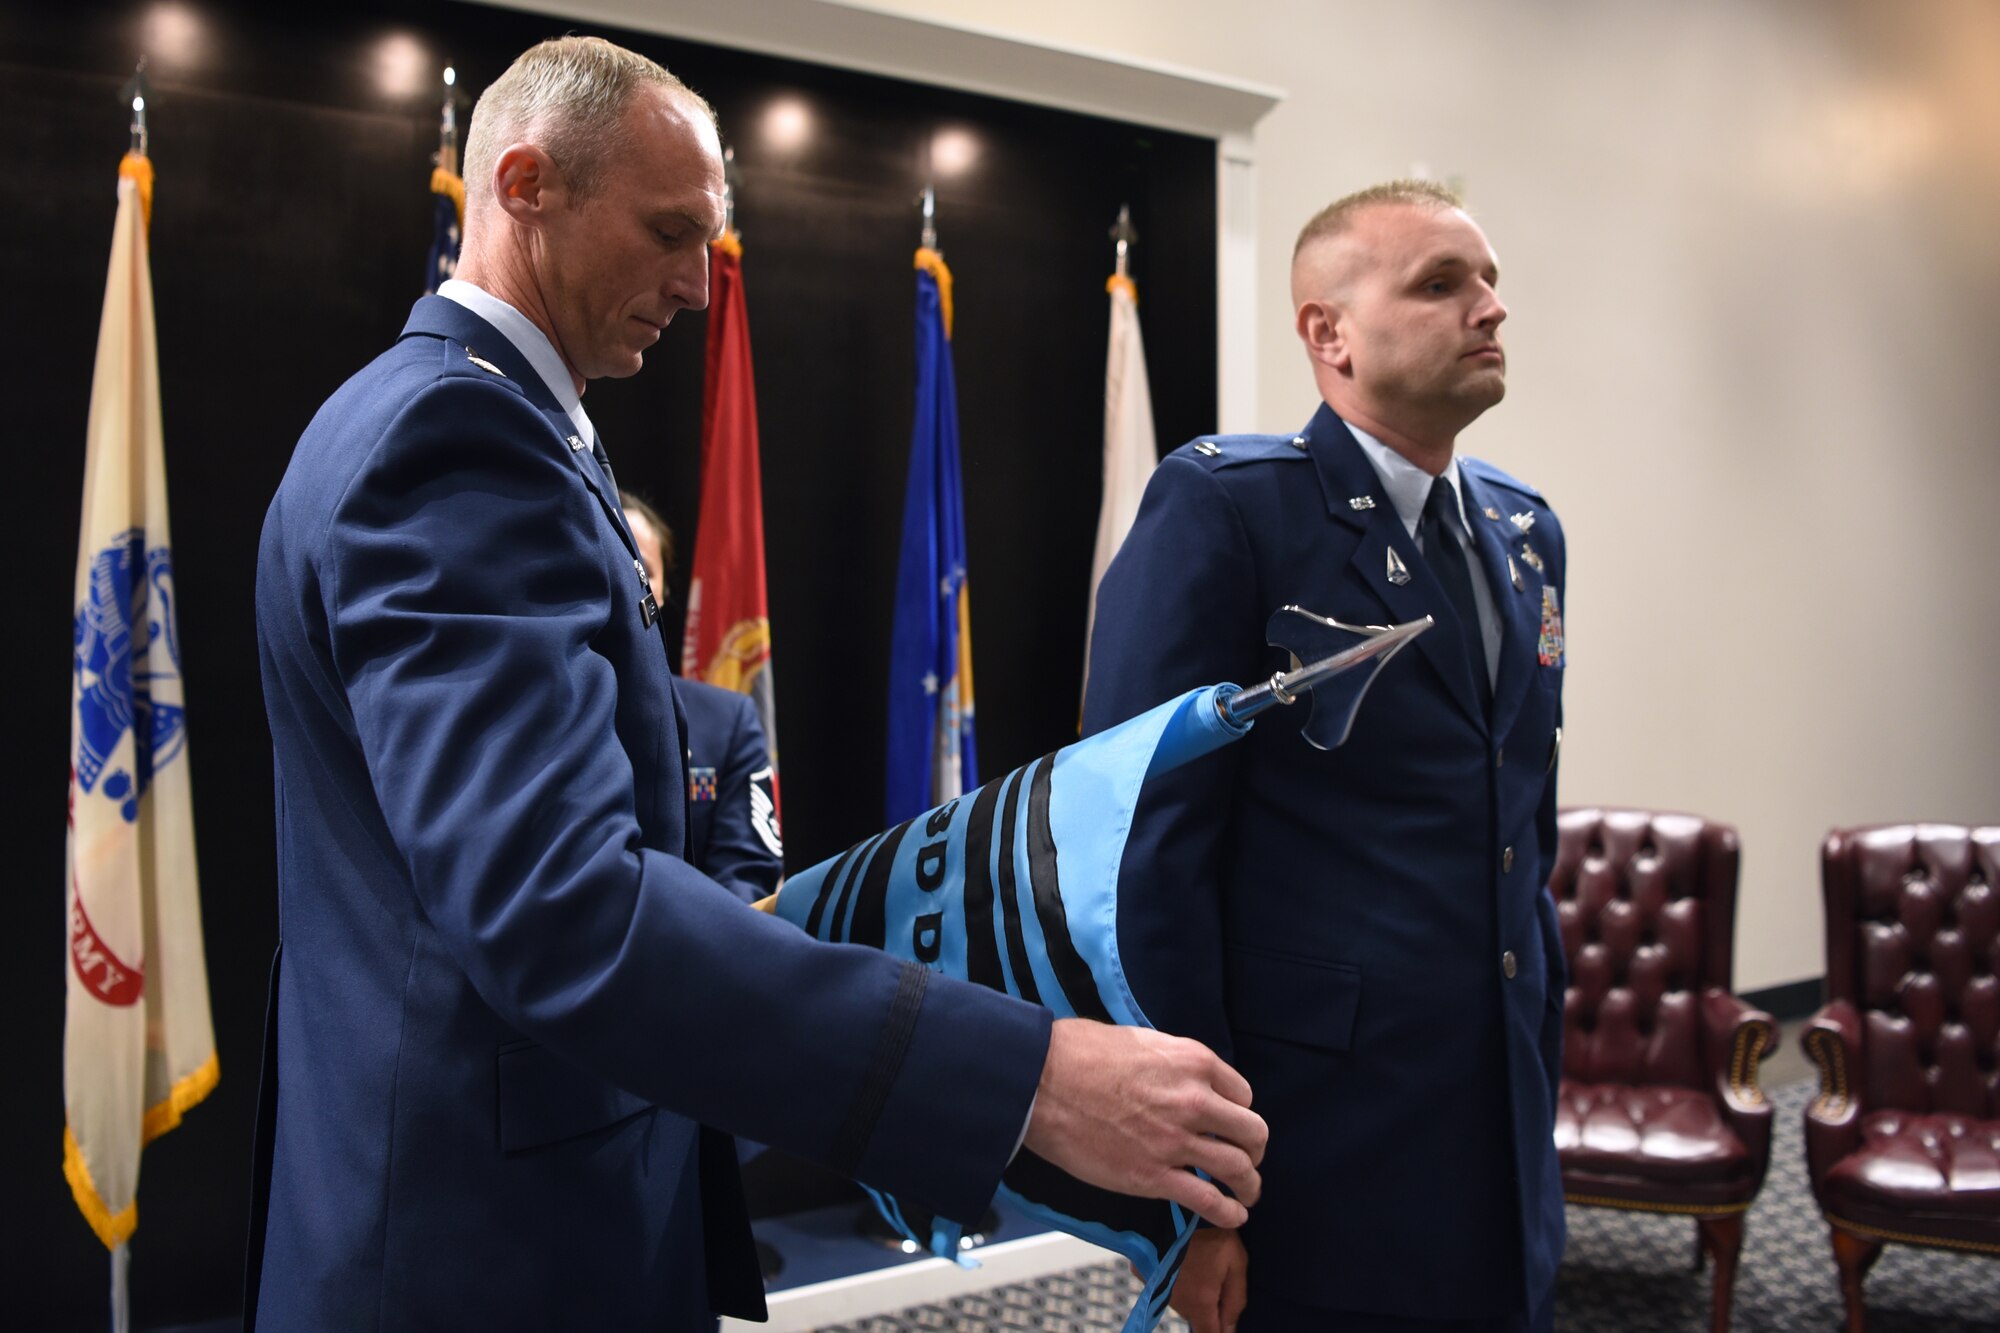 U.S. Space Force Lt. Col. Charles Cooper, 533rd Training Squadron commander, unrolls the Detachment 1 flag during the activation and assumption of responsibility for 533rd TRS, Det 1, at the Powell Event Center, Goodfellow Air Force Base, Texas, June 21, 2022. The Det 1 guidon identified the unit and its affiliation. (U.S. Air Force photo by Senior Airman Abbey Rieves)